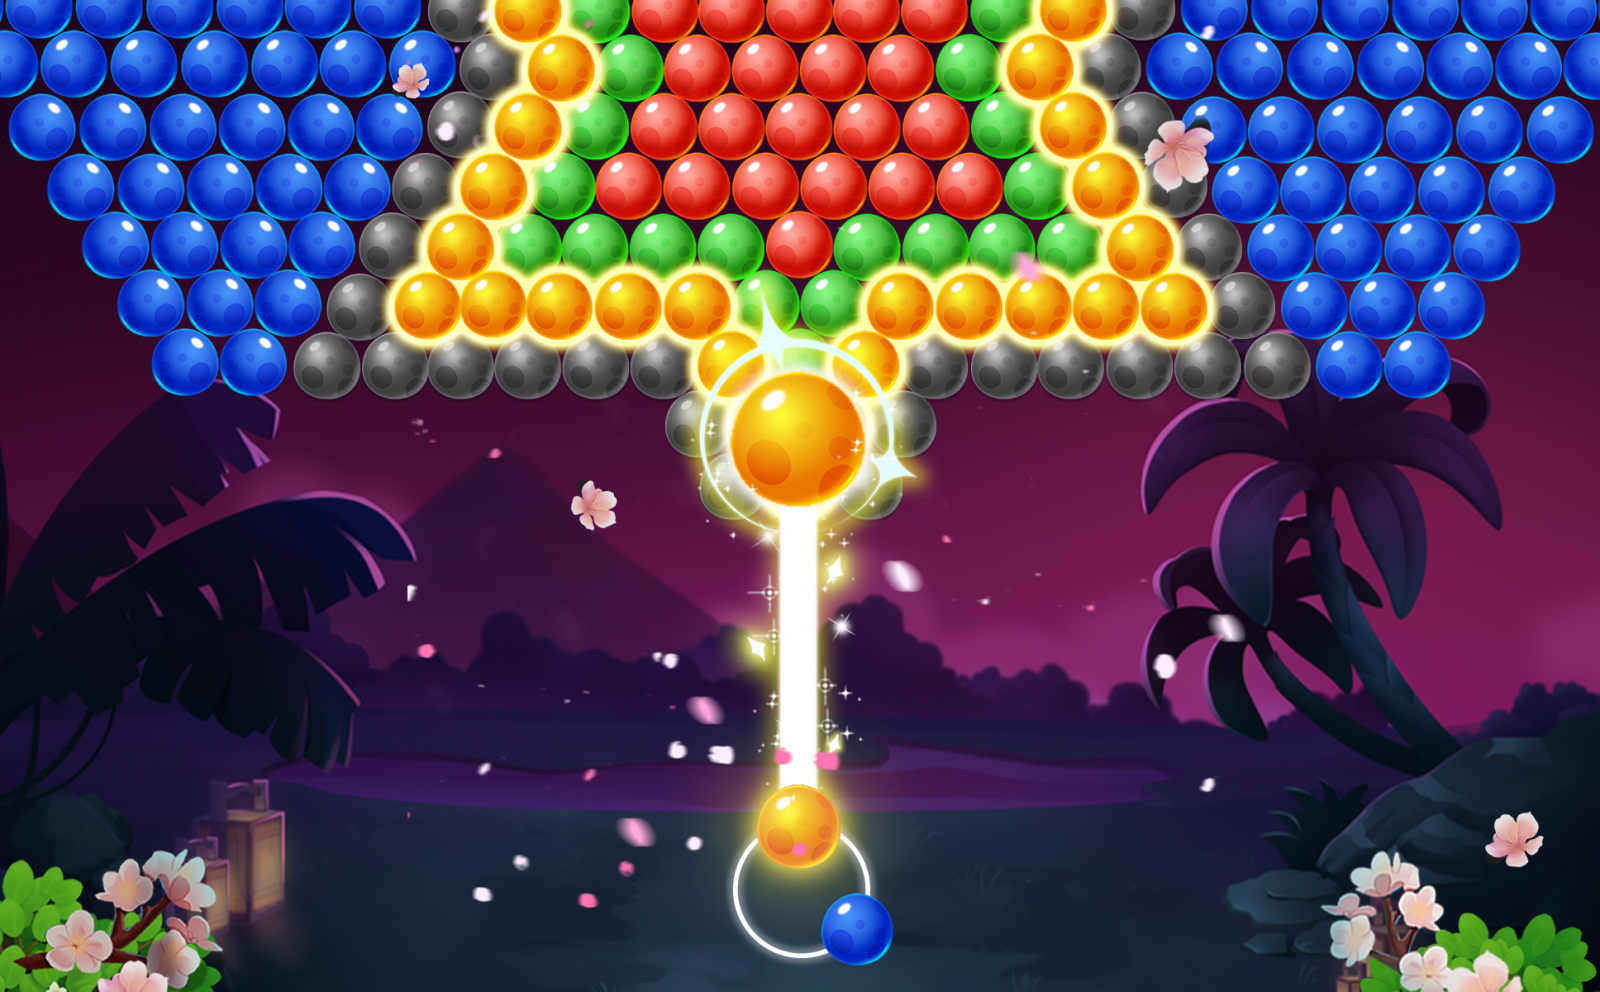 Let's Play Bubble Shooter Games at